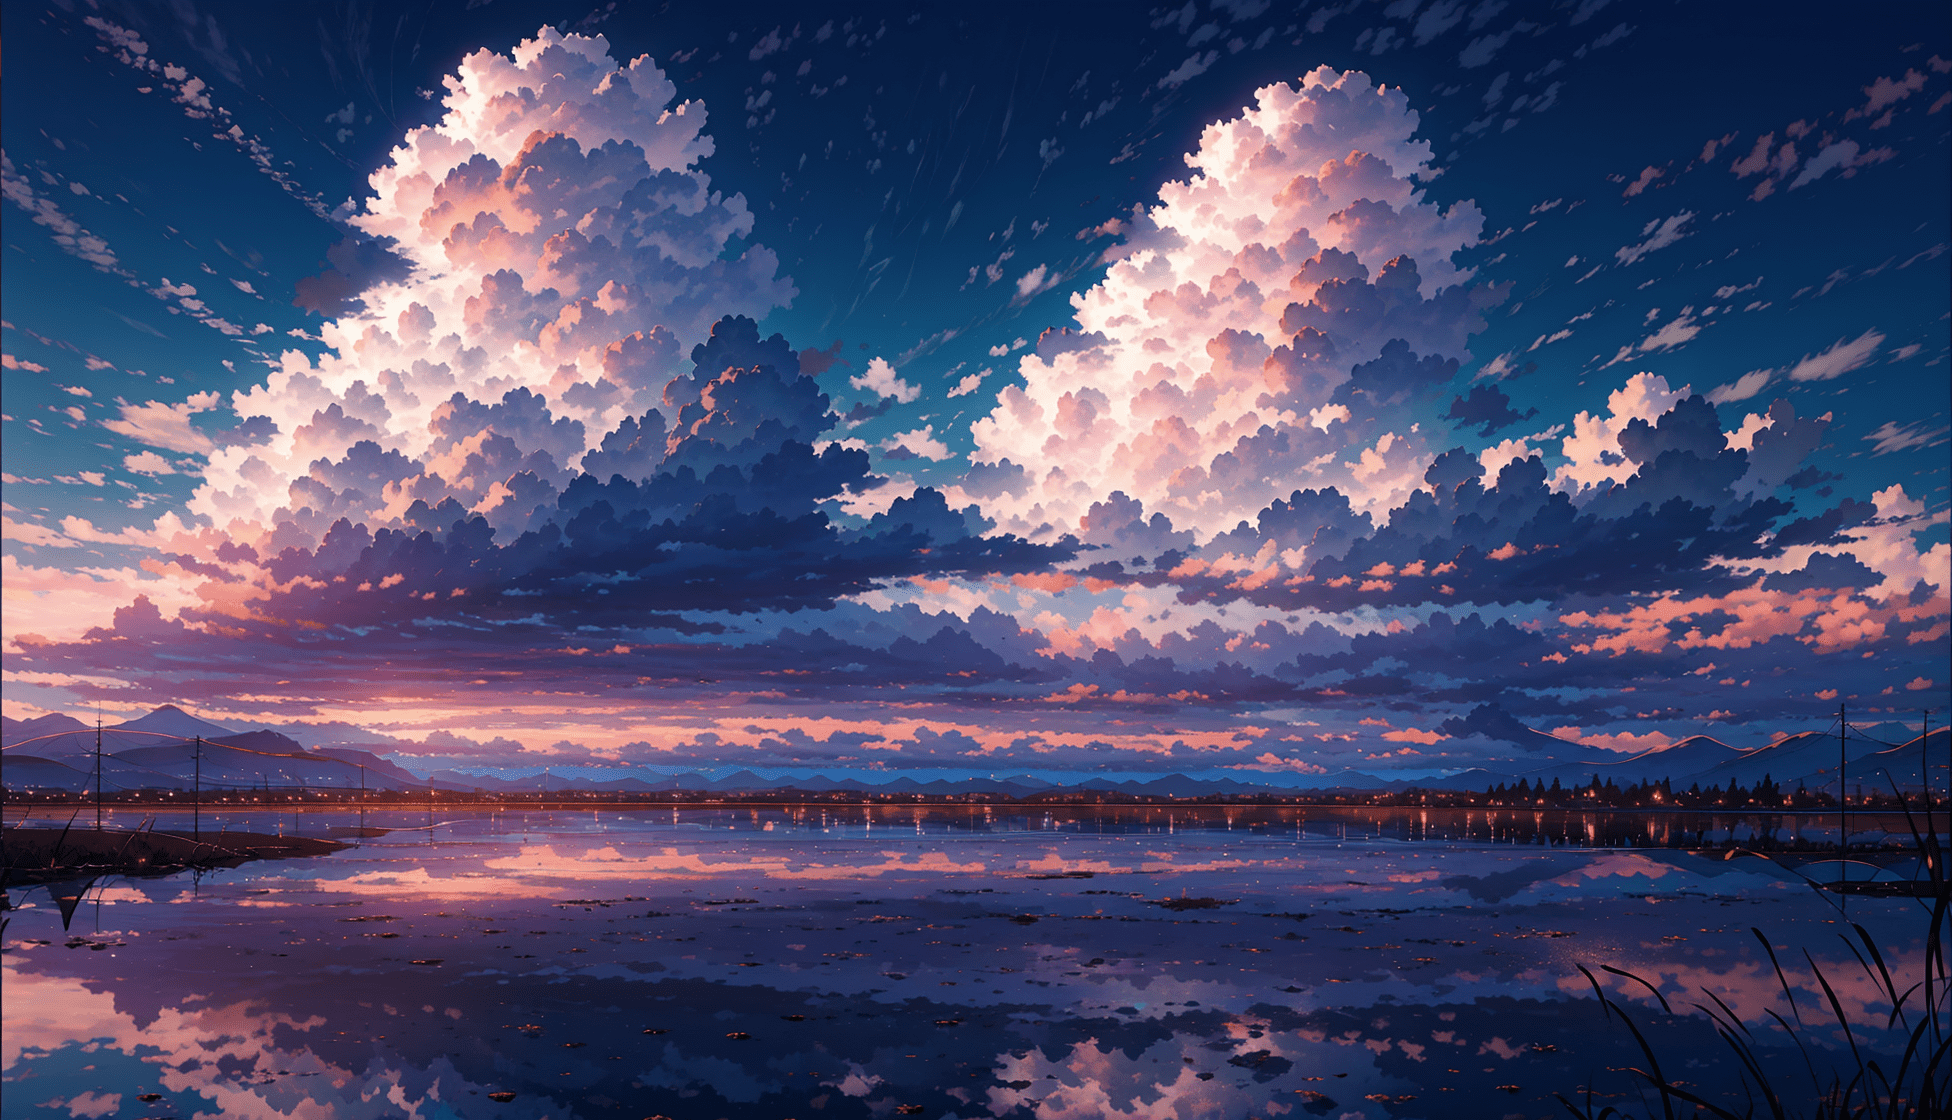 A painting of a cloudy sky over a body of water - Anime landscape, scenery